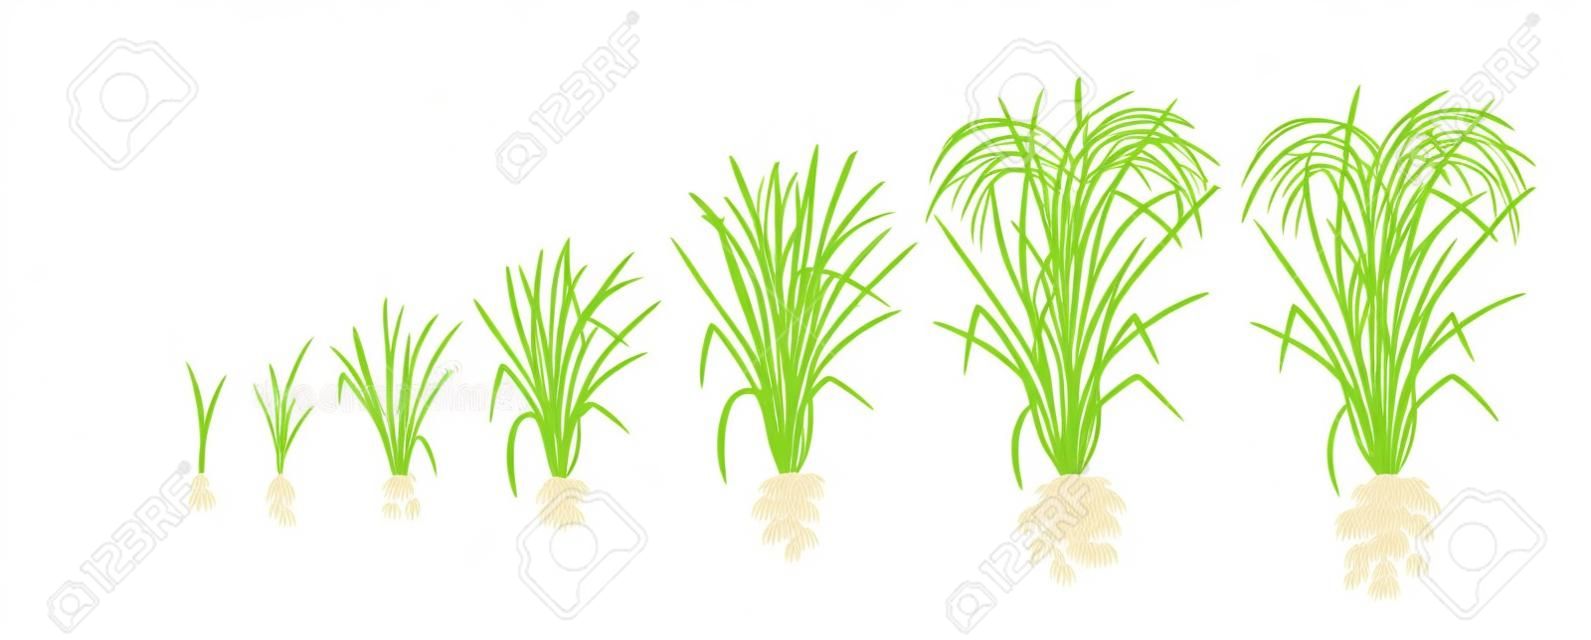 Growth stages of rice plant. Rice increase phases. Vector illustration. Oryza sativa. Ripening period. The life cycle. Use fertilizers. On white background. It is the agricultural commodity with the third-highest worldwide production.